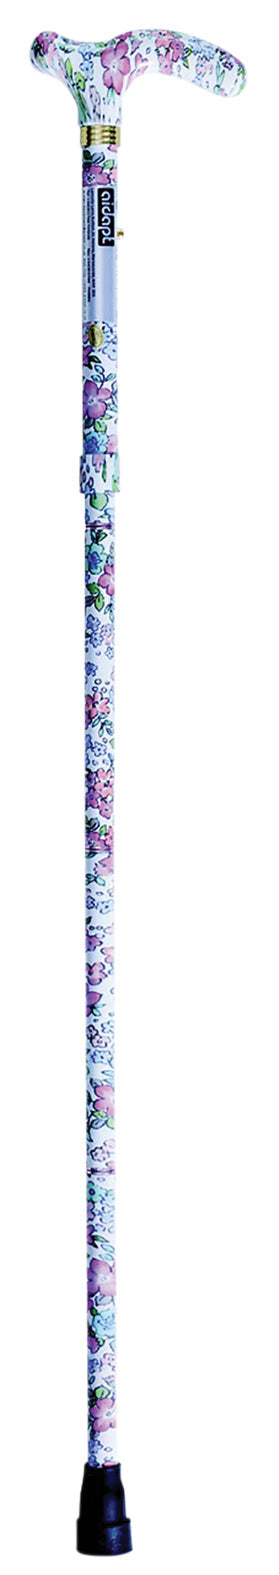 Deluxe Folding Walking Cane Floral